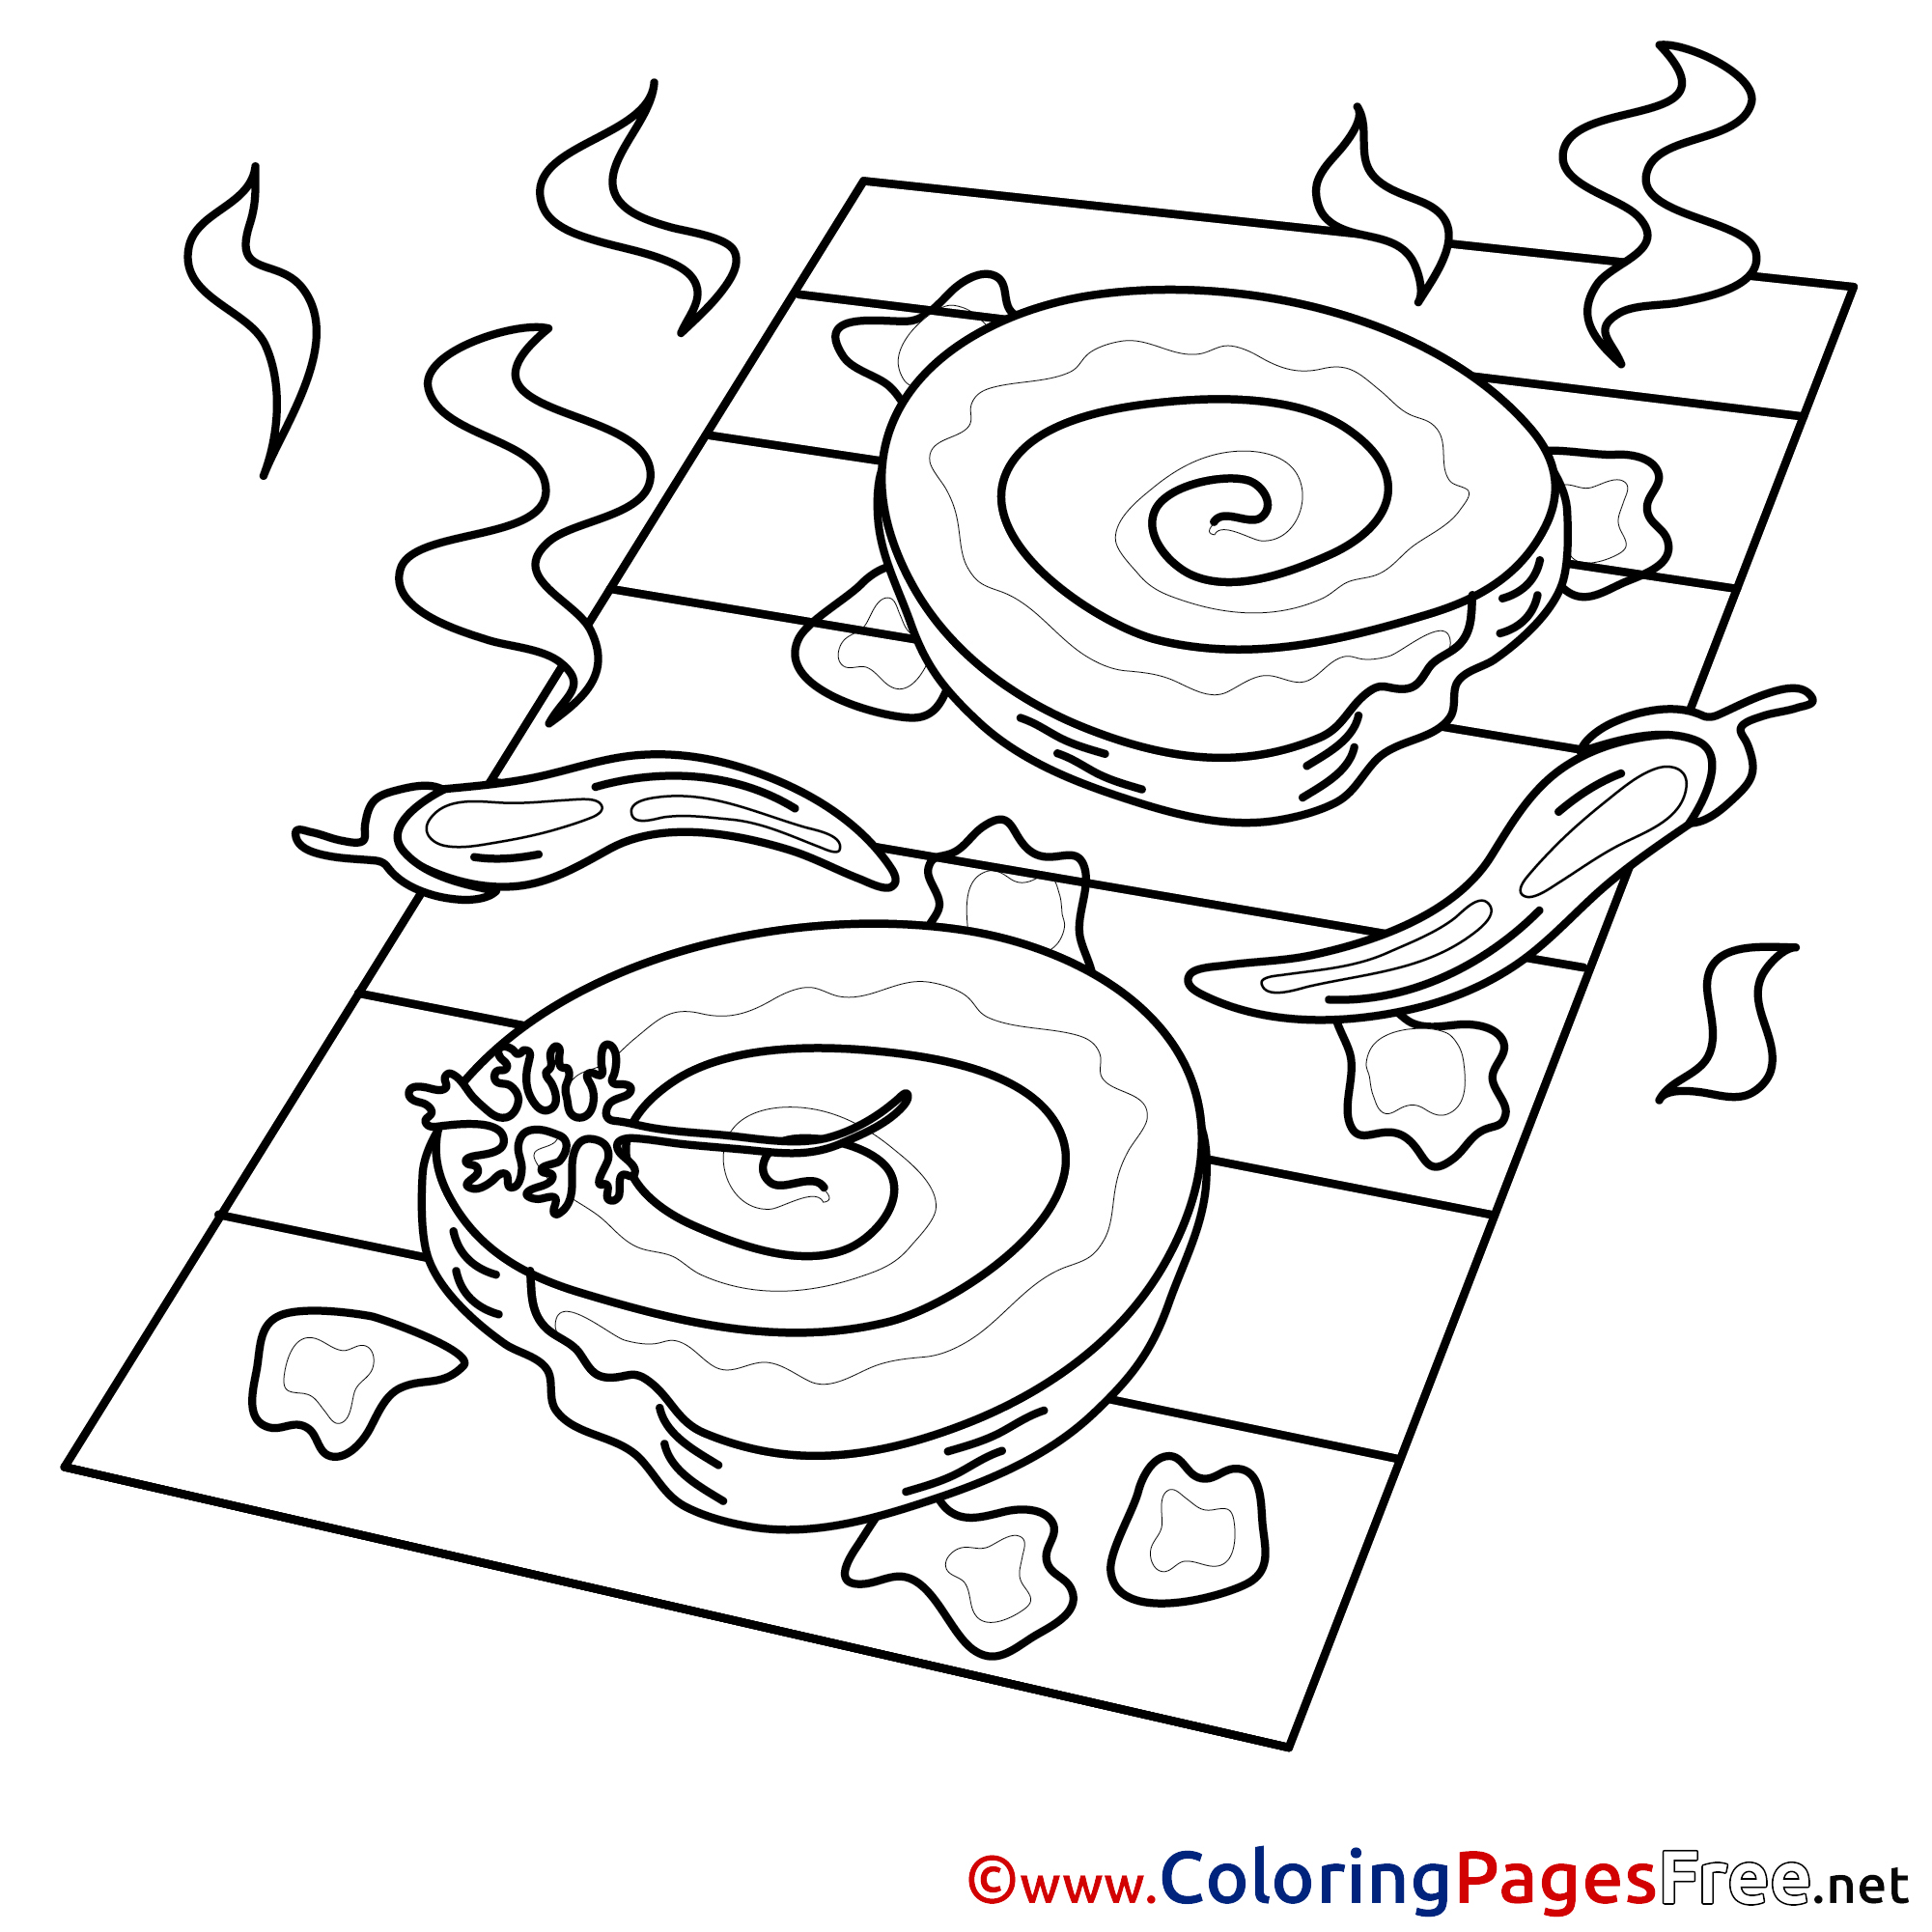 grill-free-colouring-page-download